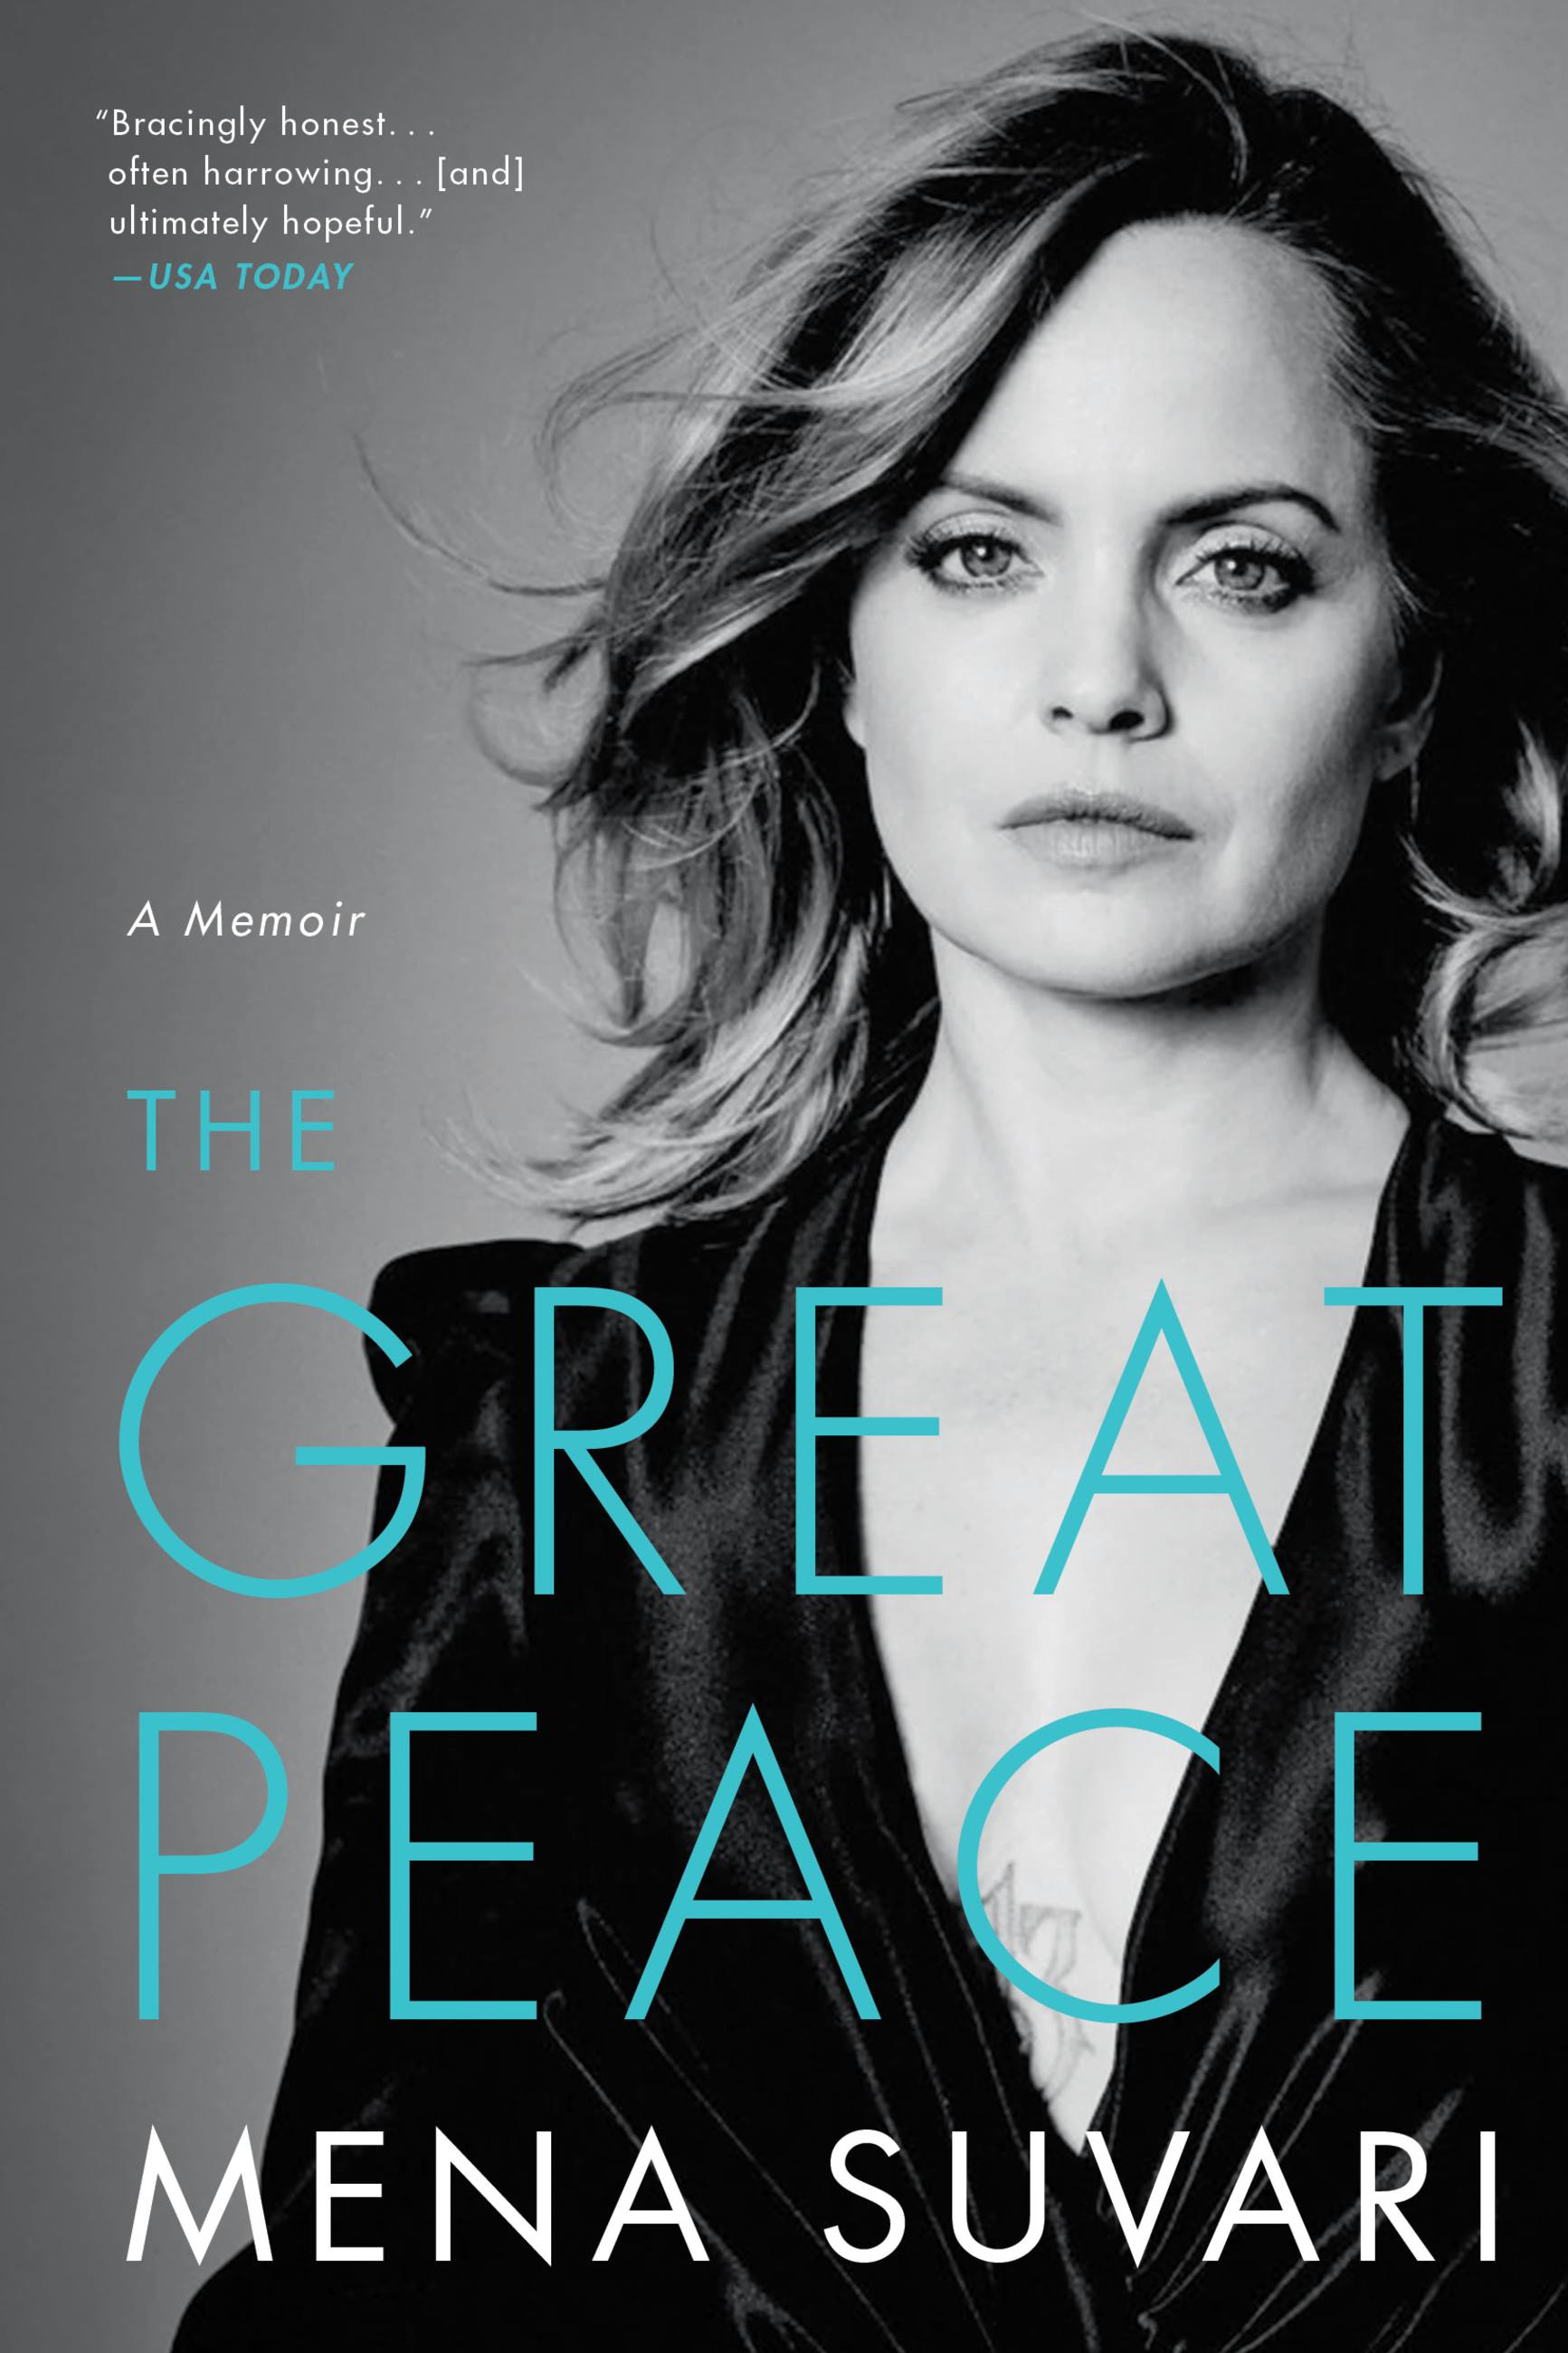 The Great Peace by Mena Suvari Hachette Book Group